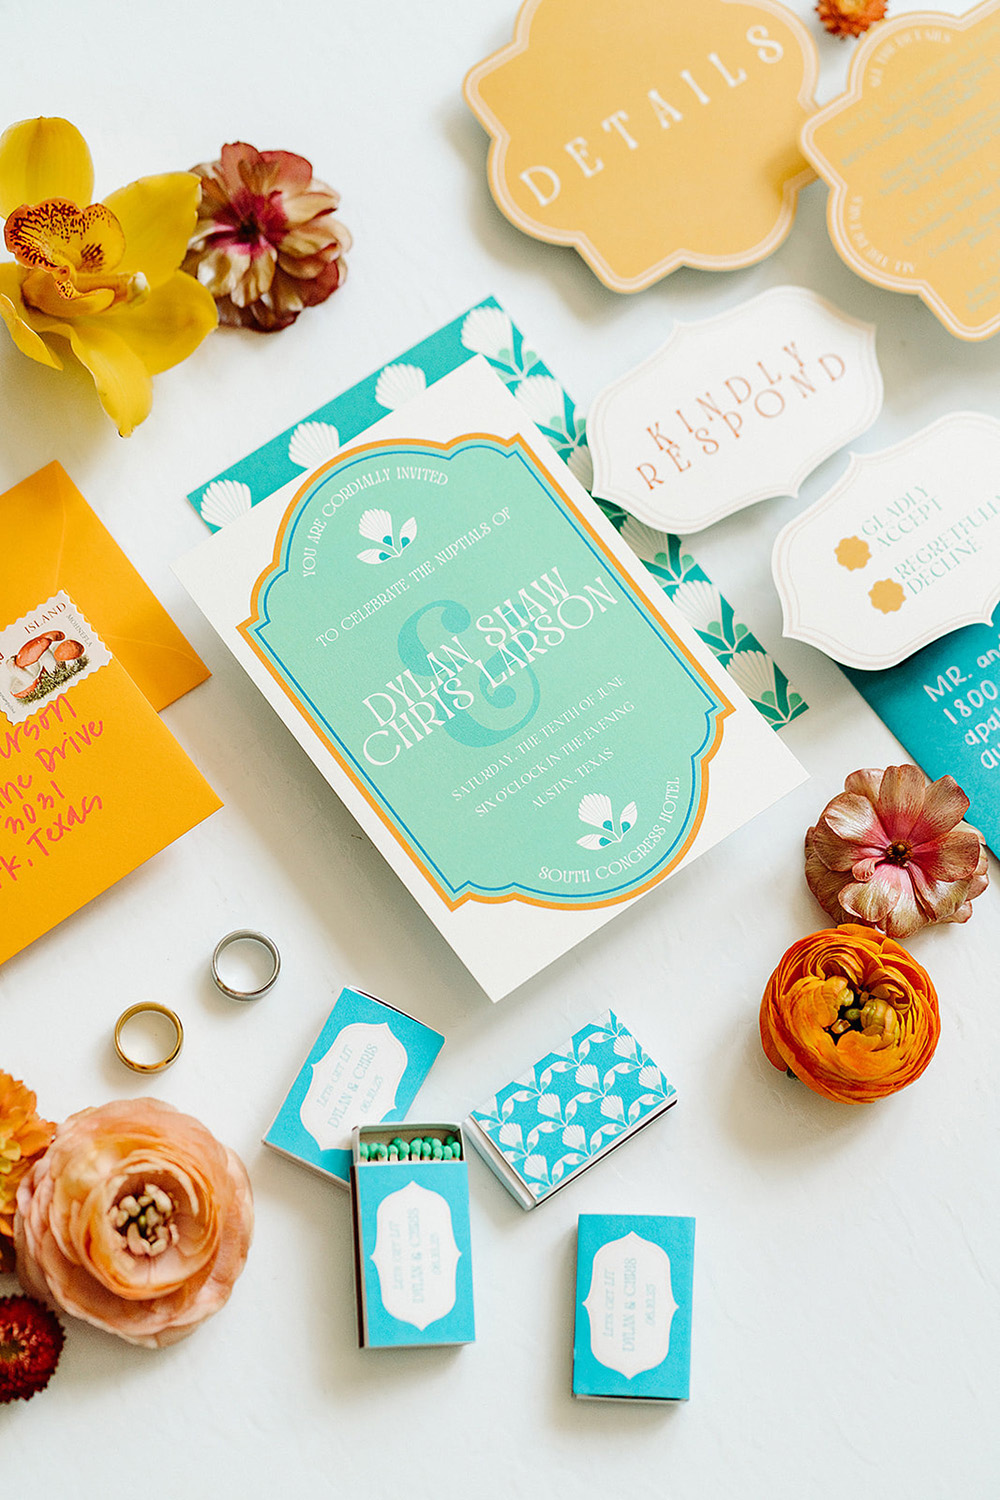 colorful wes anderson inspired wedding invitations at south congress hotel austin